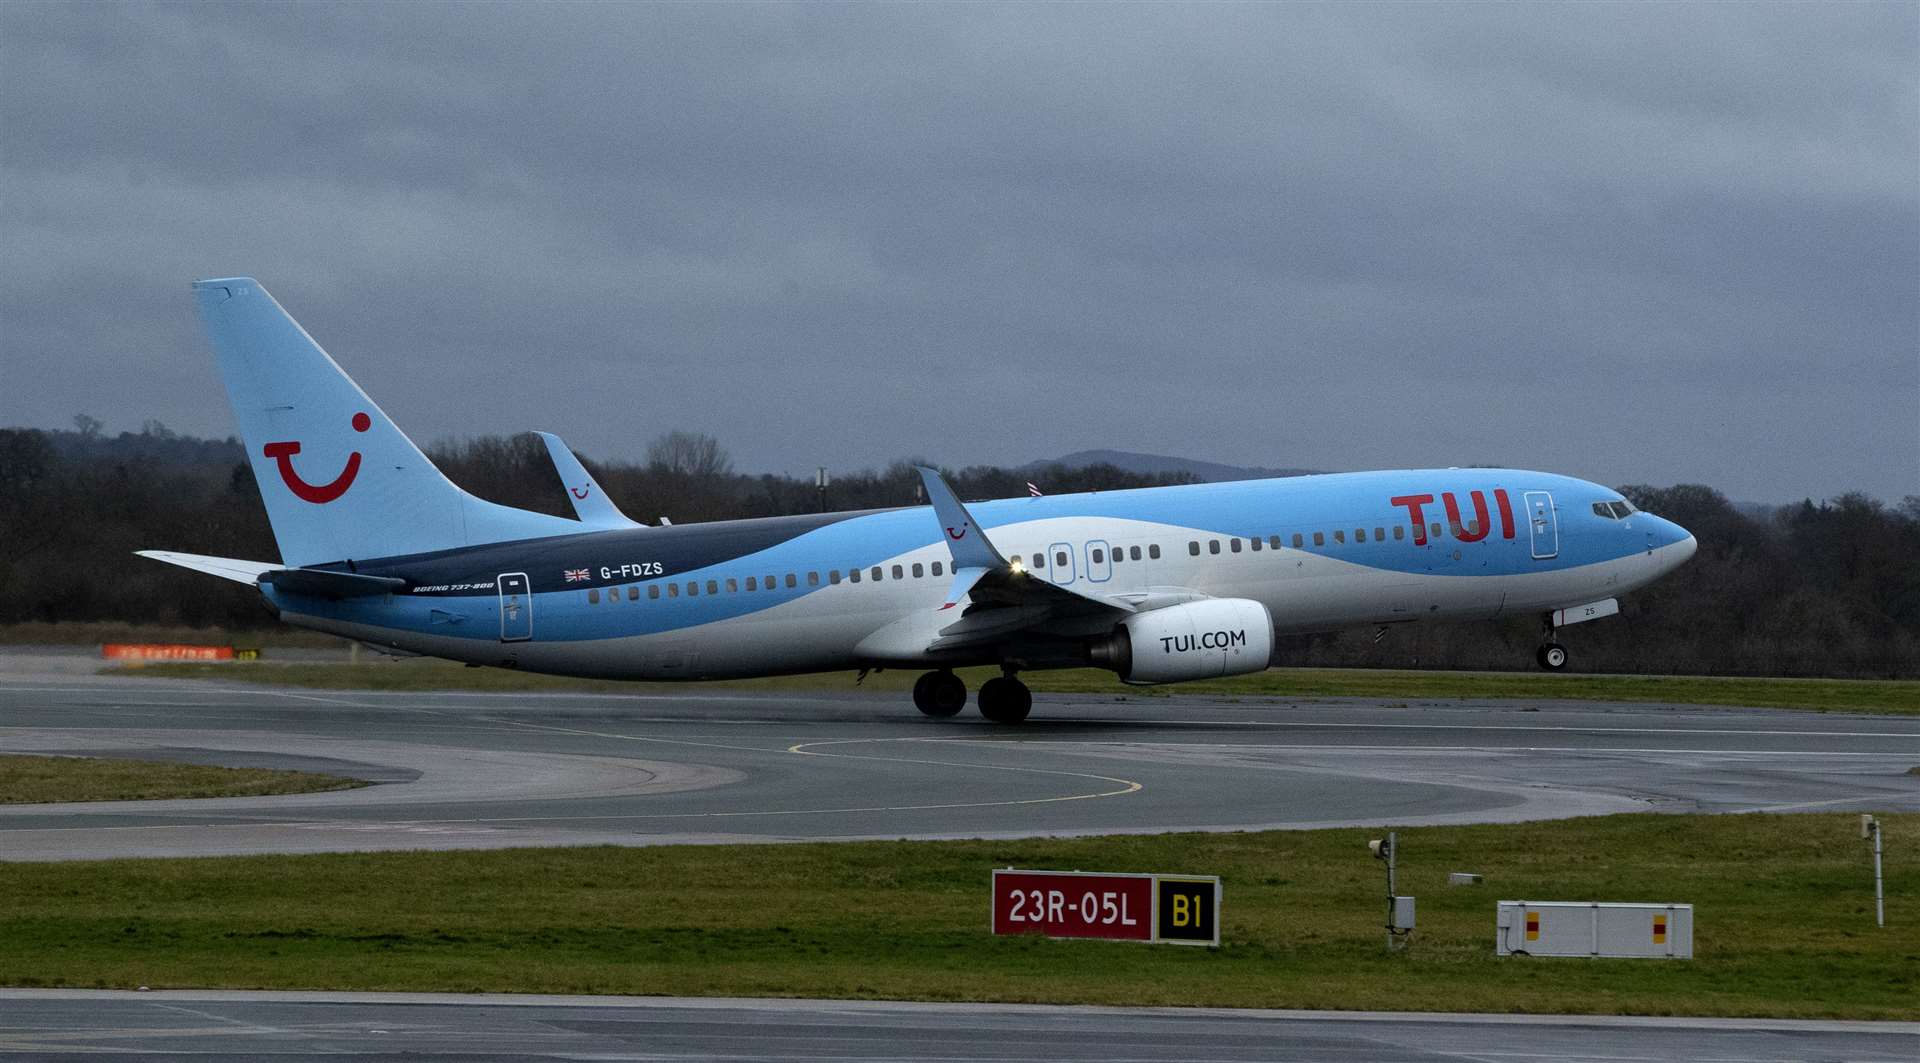 Tui recorded the second worst punctuality (Peter Byrne/PA)